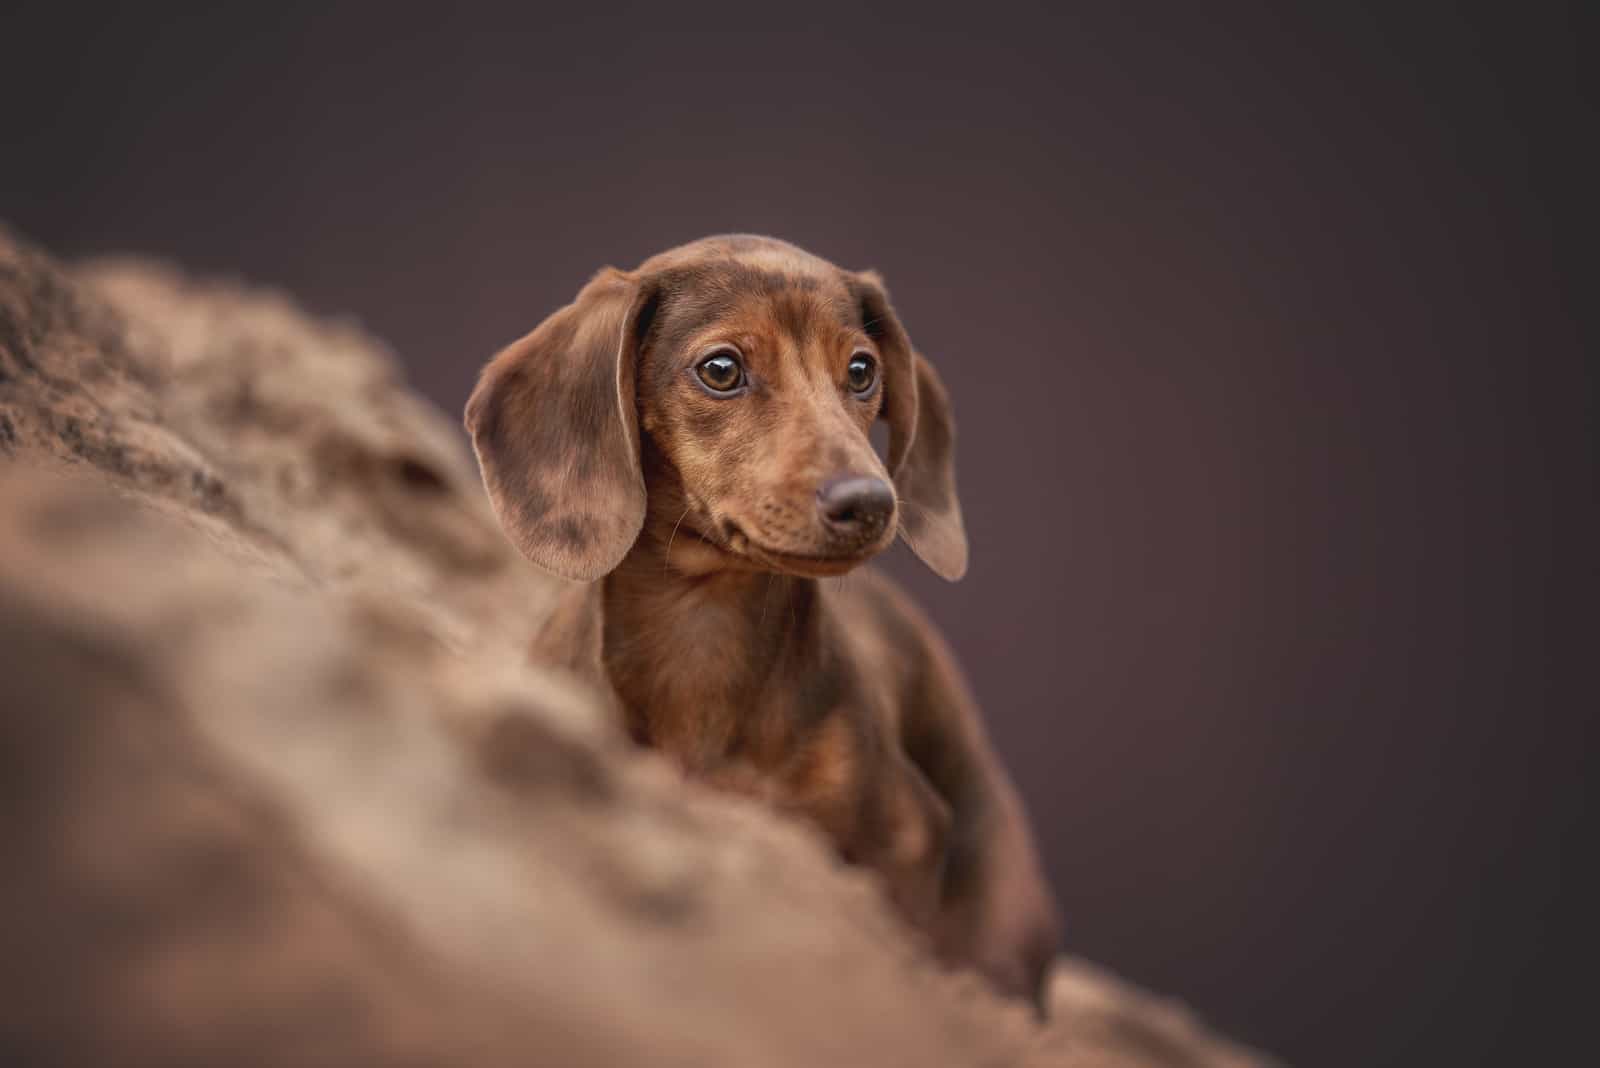 the dachshund stands on a wooden base and looks into the distance